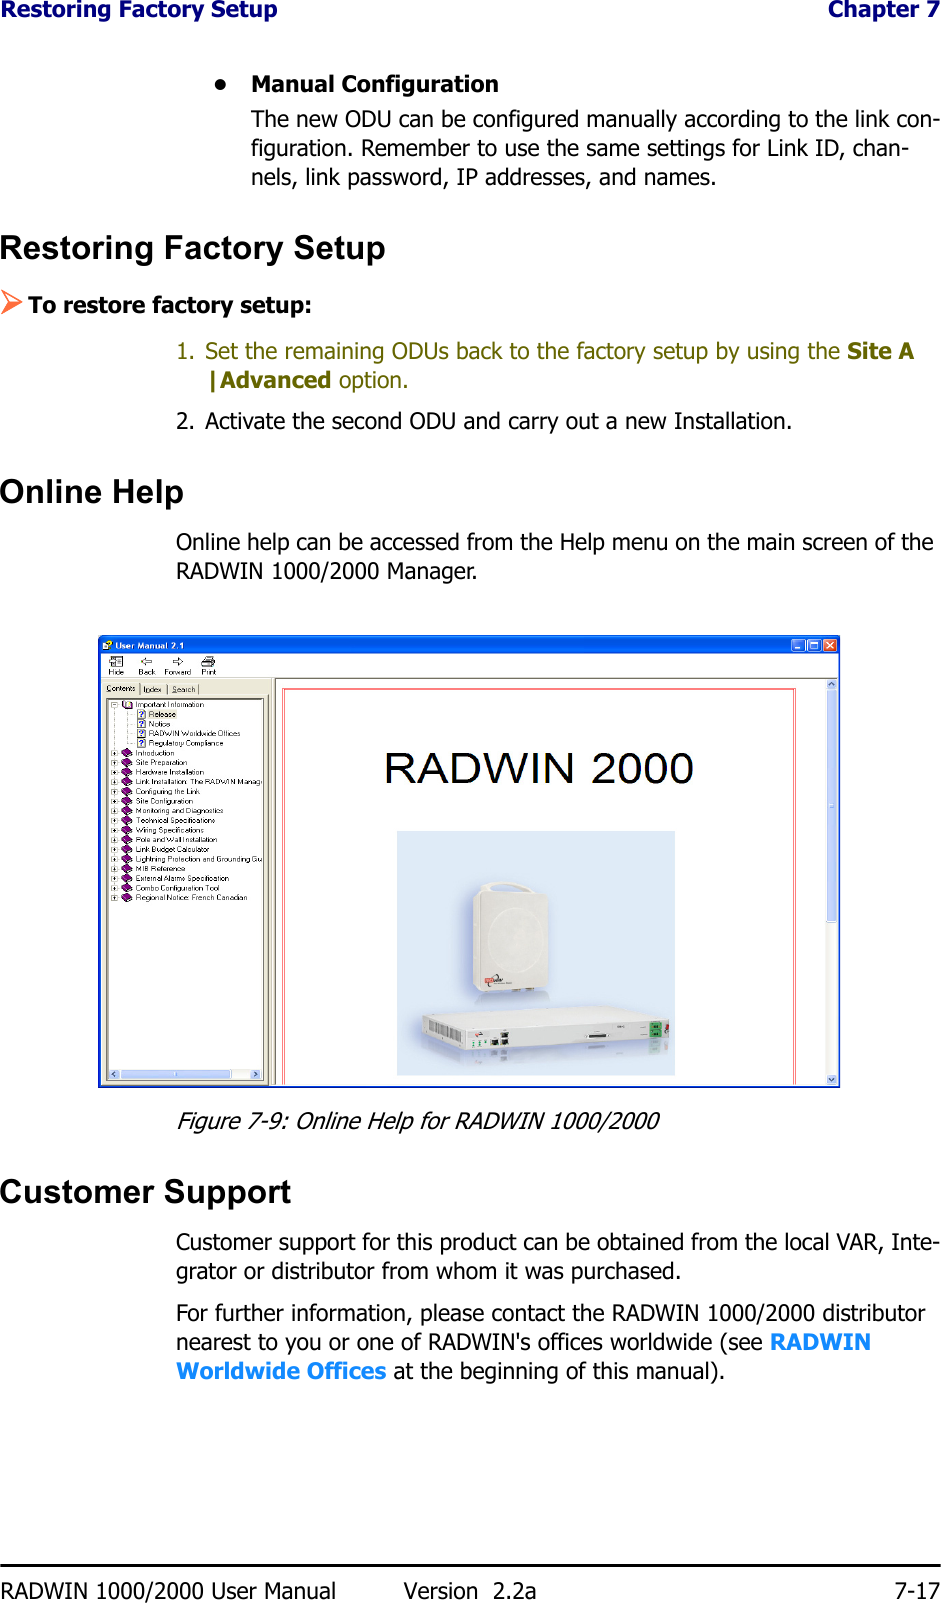 Restoring Factory Setup  Chapter 7RADWIN 1000/2000 User Manual Version  2.2a 7-17• Manual ConfigurationThe new ODU can be configured manually according to the link con-figuration. Remember to use the same settings for Link ID, chan-nels, link password, IP addresses, and names. Restoring Factory Setup¾To restore factory setup:1. Set the remaining ODUs back to the factory setup by using the Site A |Advanced option.2. Activate the second ODU and carry out a new Installation.Online HelpOnline help can be accessed from the Help menu on the main screen of the RADWIN 1000/2000 Manager.Figure 7-9: Online Help for RADWIN 1000/2000Customer SupportCustomer support for this product can be obtained from the local VAR, Inte-grator or distributor from whom it was purchased.For further information, please contact the RADWIN 1000/2000 distributor nearest to you or one of RADWIN&apos;s offices worldwide (see RADWIN Worldwide Offices at the beginning of this manual).